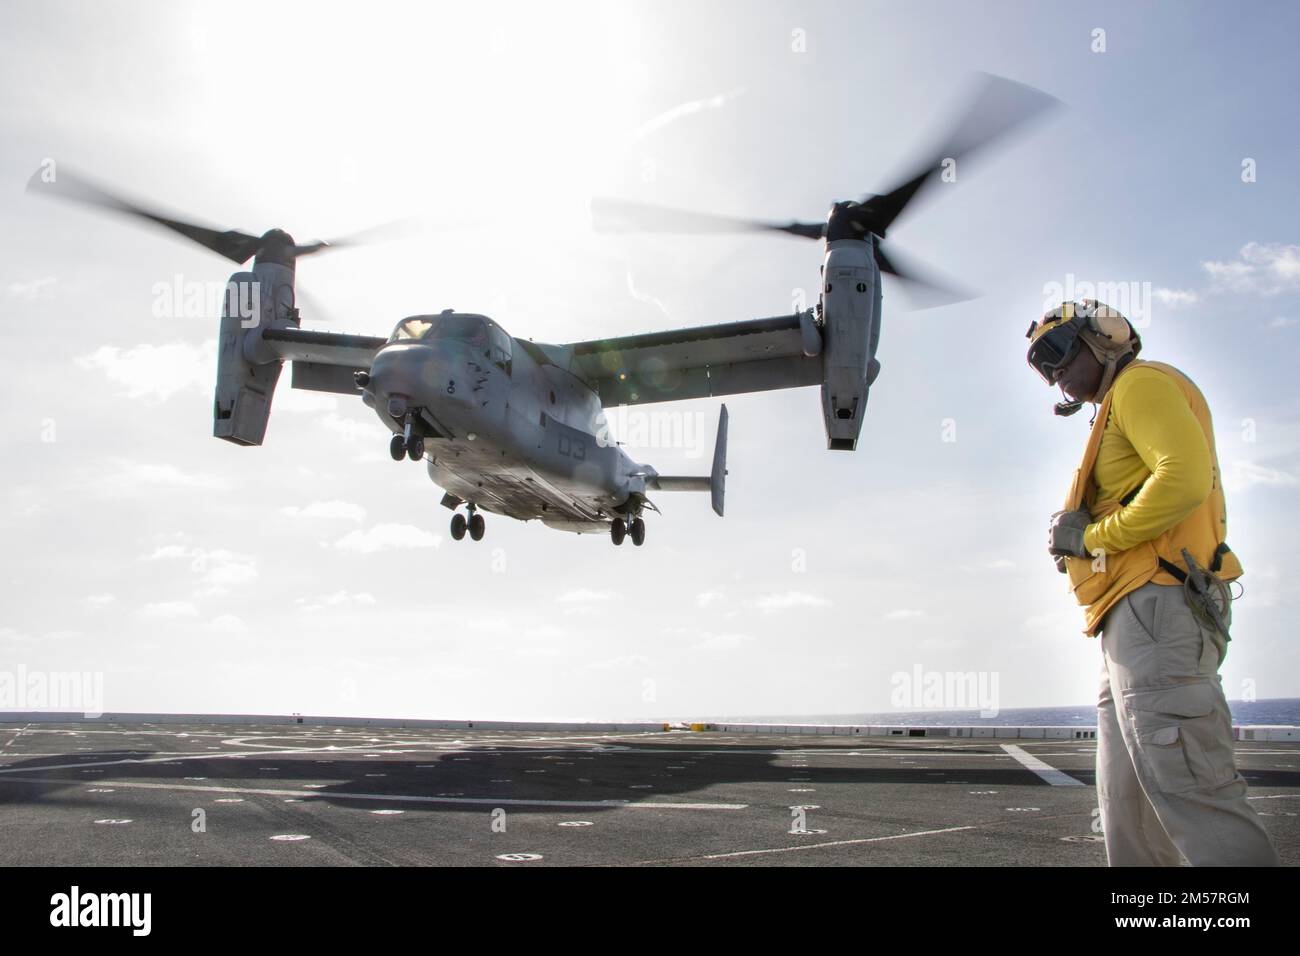 PACIFIC OCEAN (Dec. 4, 2022) – An MV-22 Osprey assigned to Marine Medium Tiltrotor Squadron (VMM) 362 approaches the flight deck of amphibious transport dock USS Anchorage (LPD 23) during flight operations, Dec. 4, 2022. The ability to operate seamlessly and simultaneously on the sea, ashore, and in the air represents the unique value of amphibious capability provided by the Amphibious Ready Group and Marine Expeditionary Team. The Makin Island Amphibious Ready Group, comprised of amphibious assault ship USS Makin Island (LHD 8) and amphibious transport docks USS Anchorage (LPD 23) and USS Joh Stock Photo